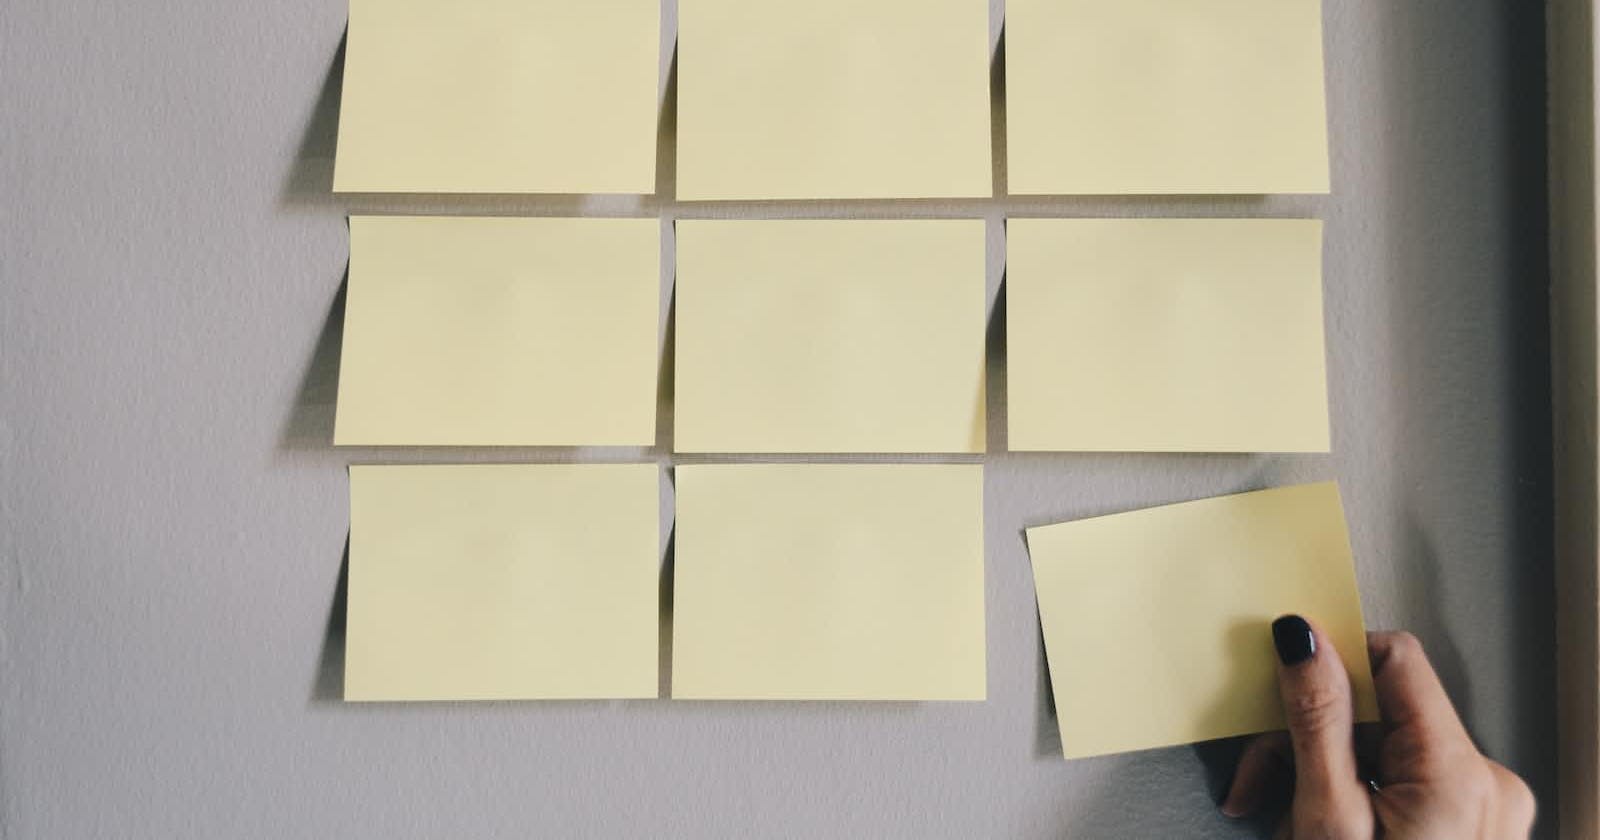 How to use sticky notes Effectively?